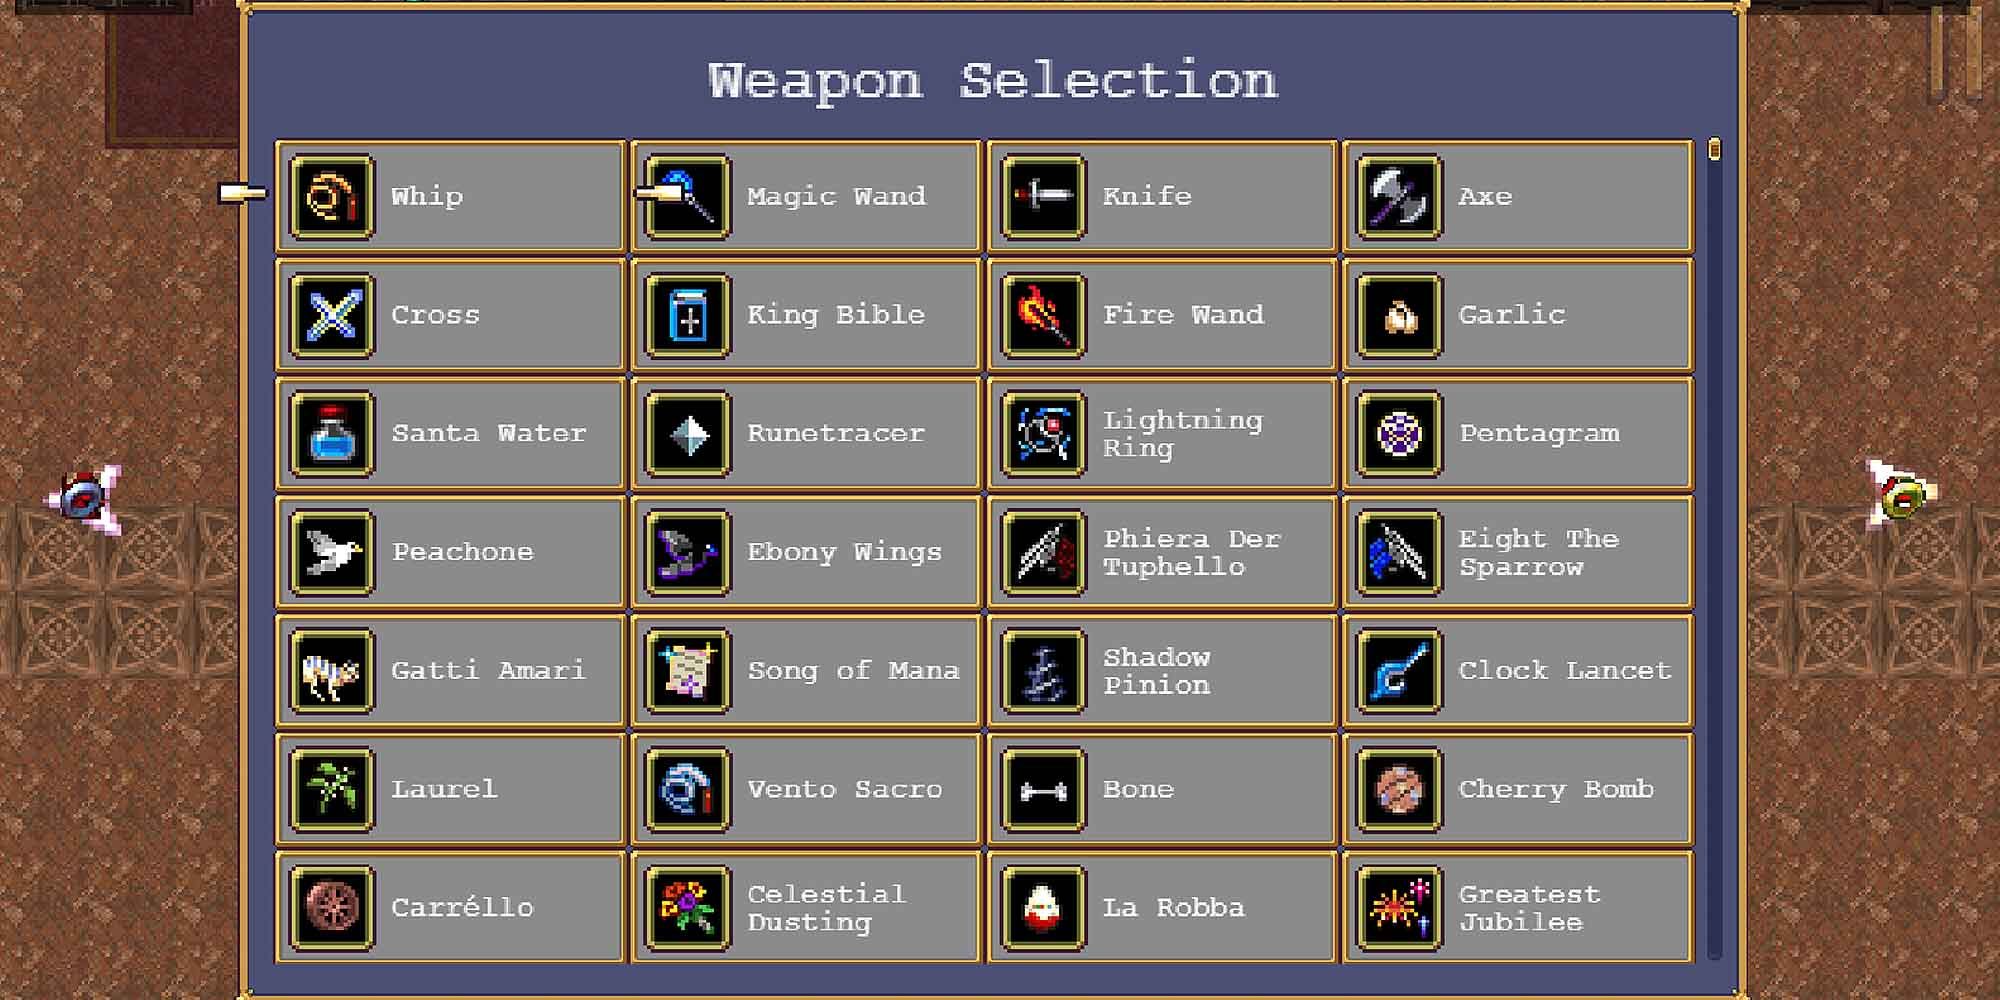 Selecting any weapon with the Candybox in Vampire Survivors